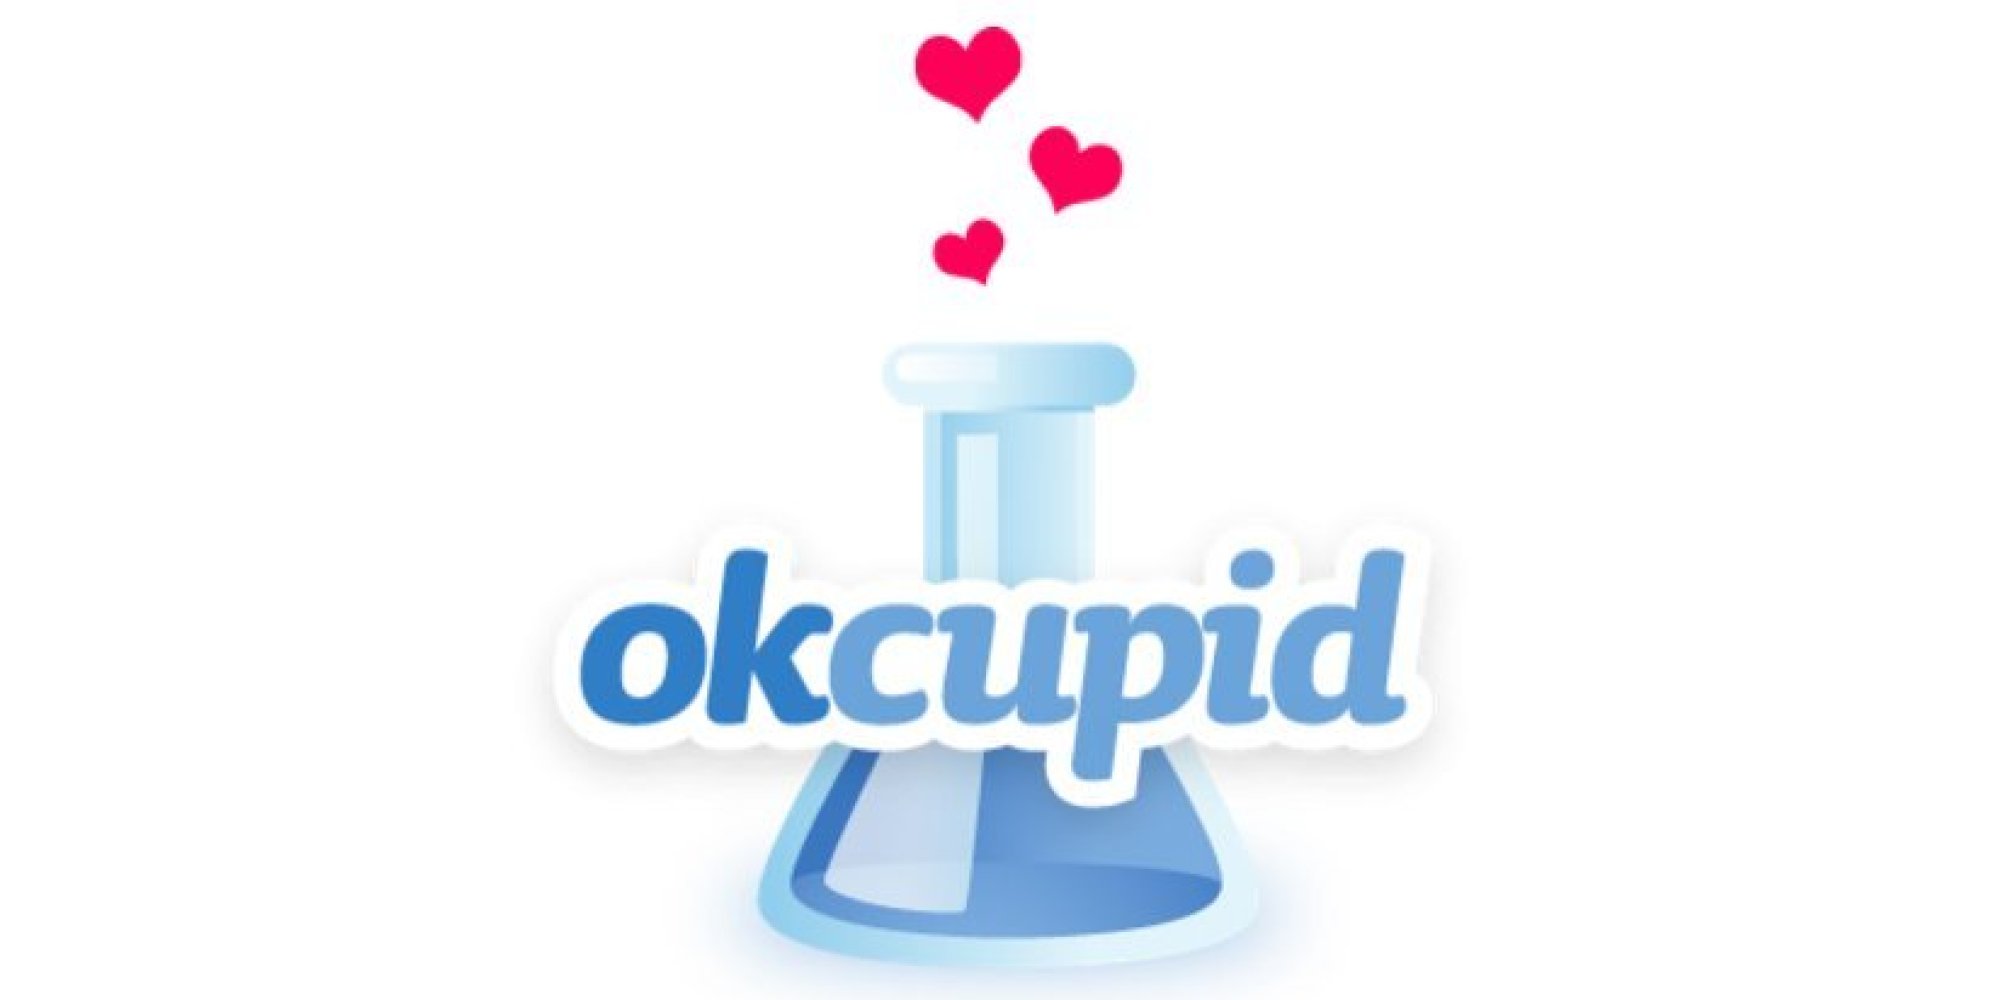 Flirt Find a partner with OKcupid There are applications for absolutely everything, we find apps to watch movies ...